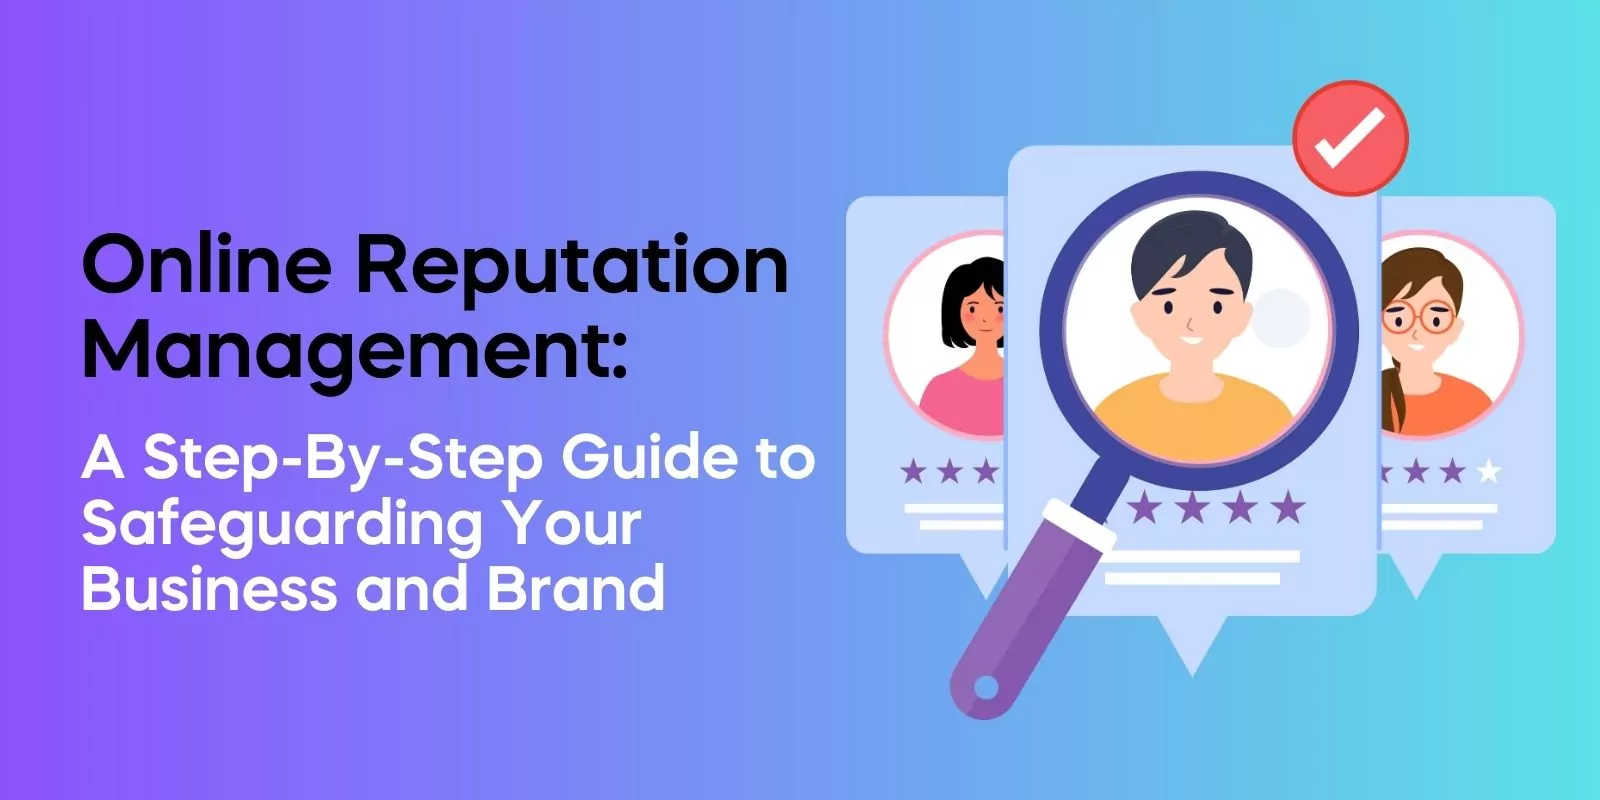 Online Reputation Management: A Step-By-Step Guide to Safeguarding Your Business and Brand